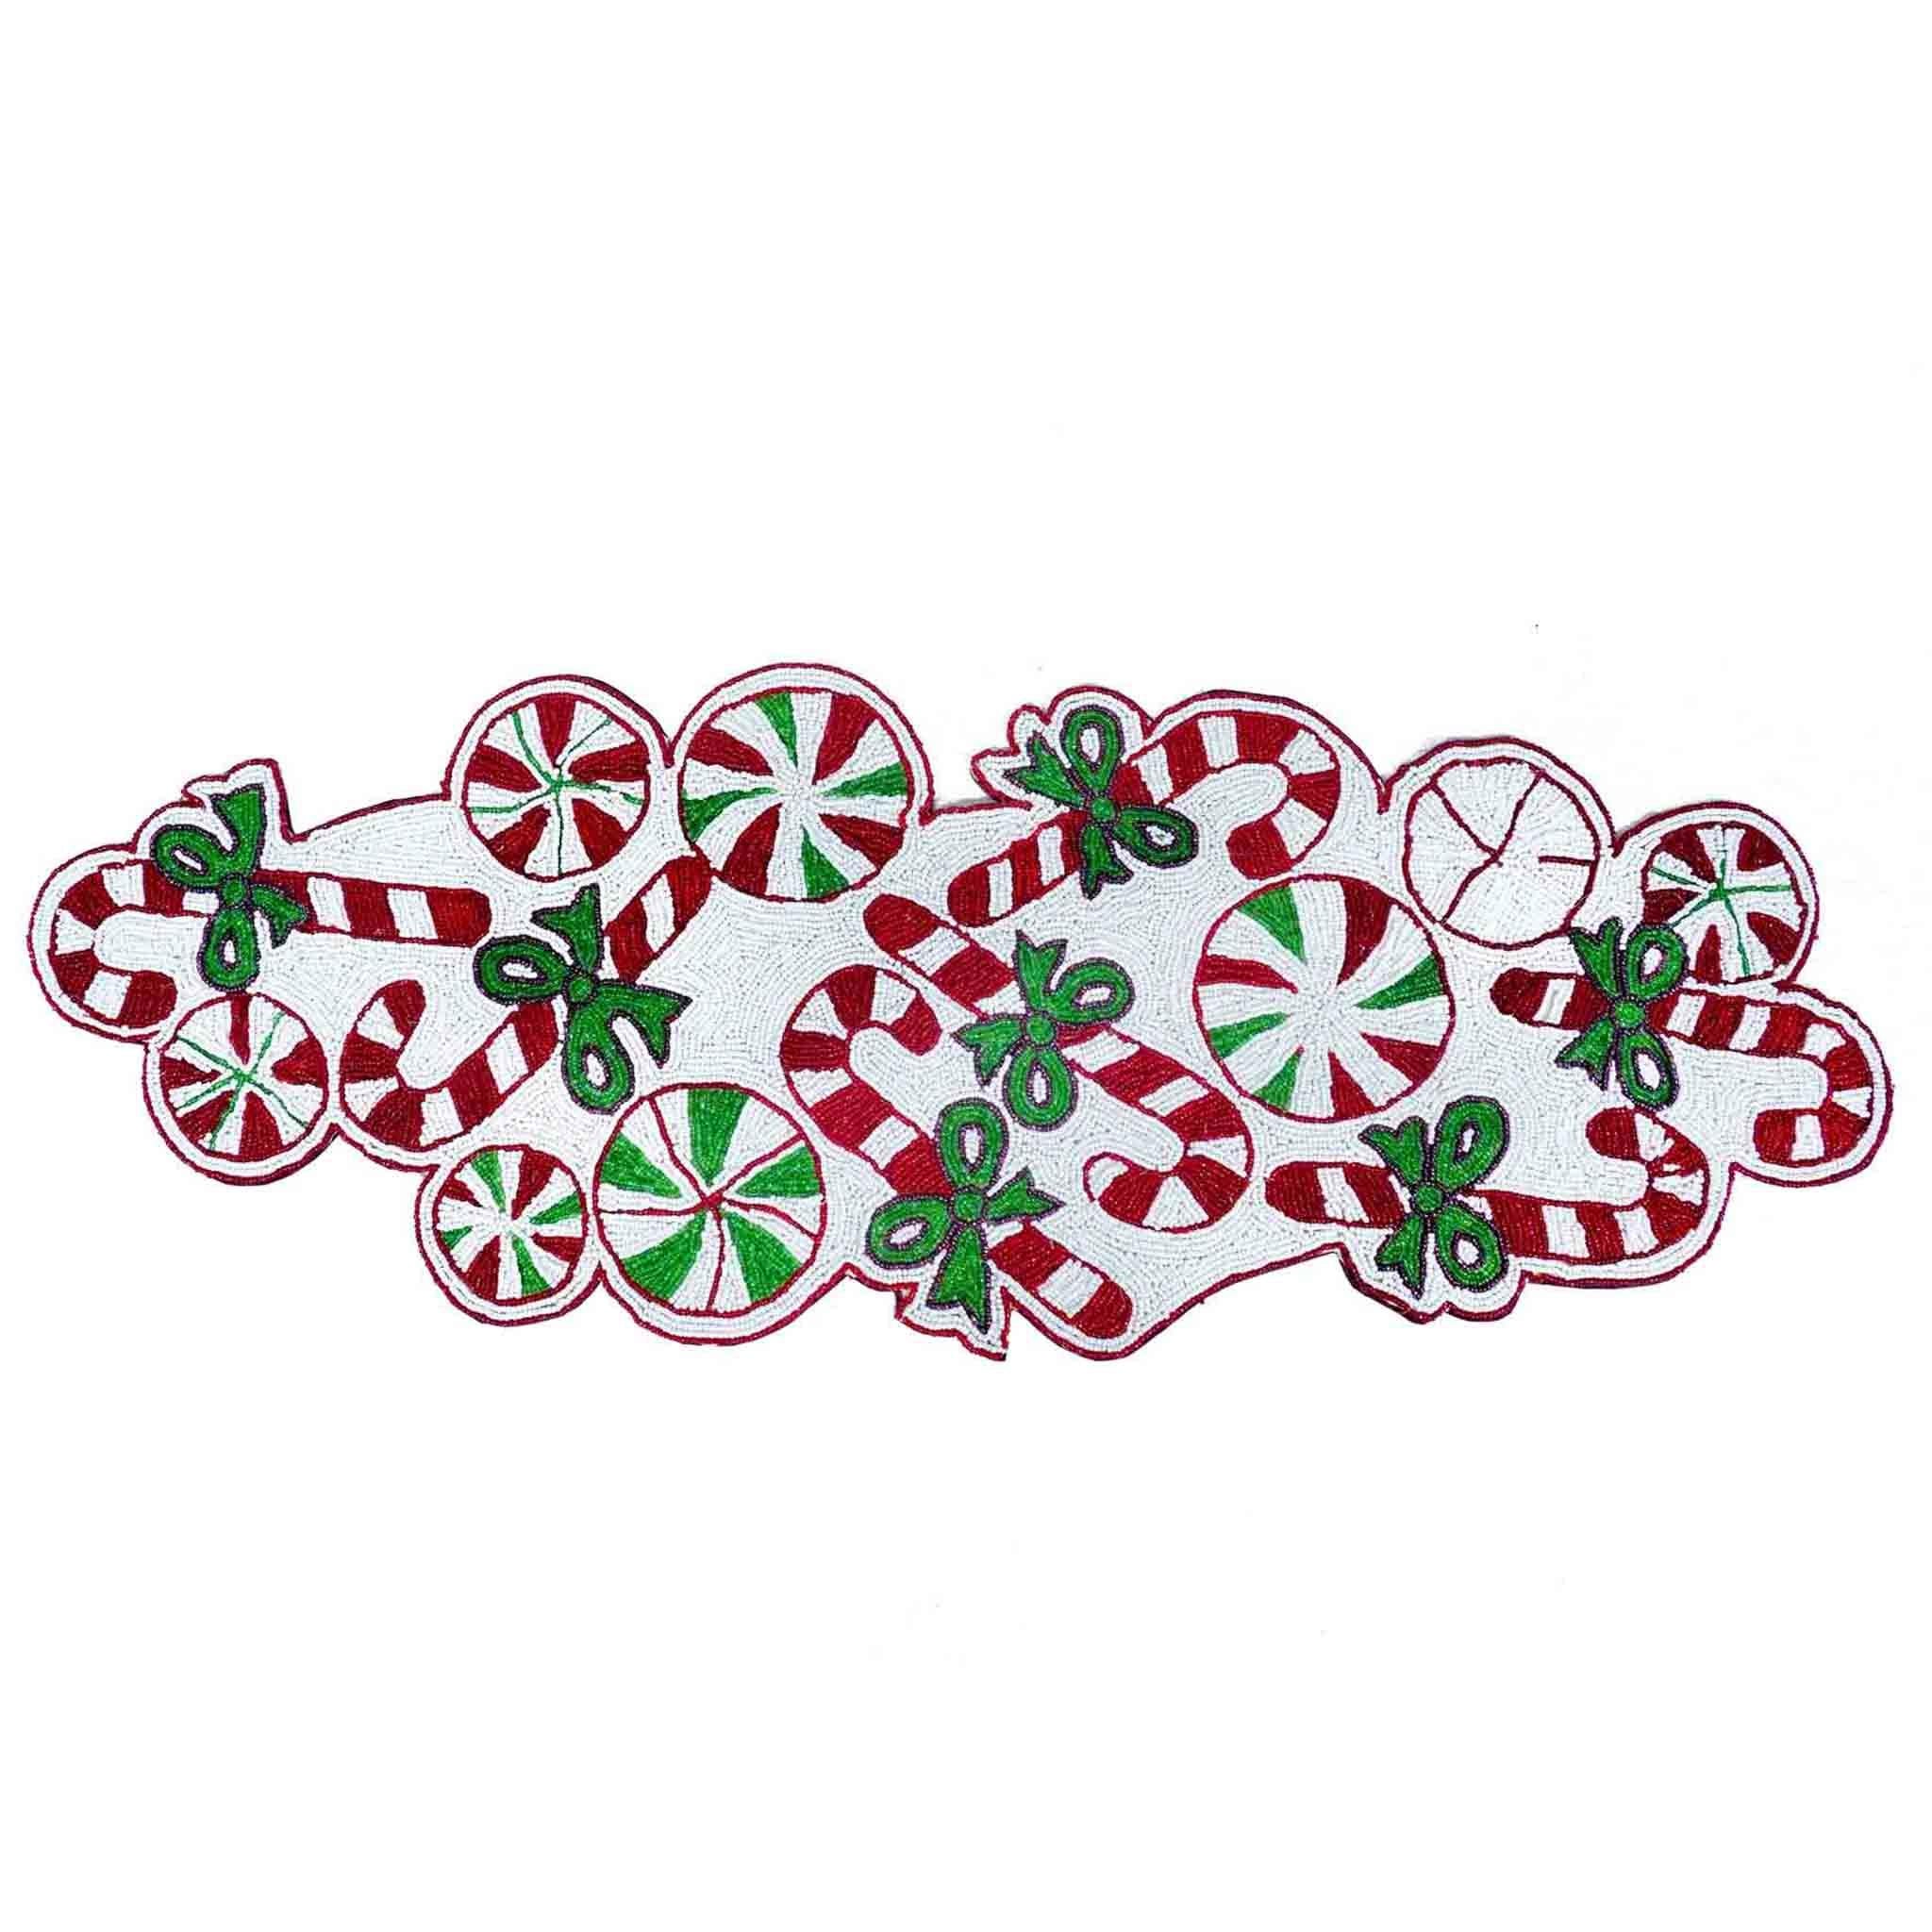 Jingle Balls Bead Table Setting for 4 - Embroidered Holiday Placemats, Napkin Rings & Table Runner in White & Red